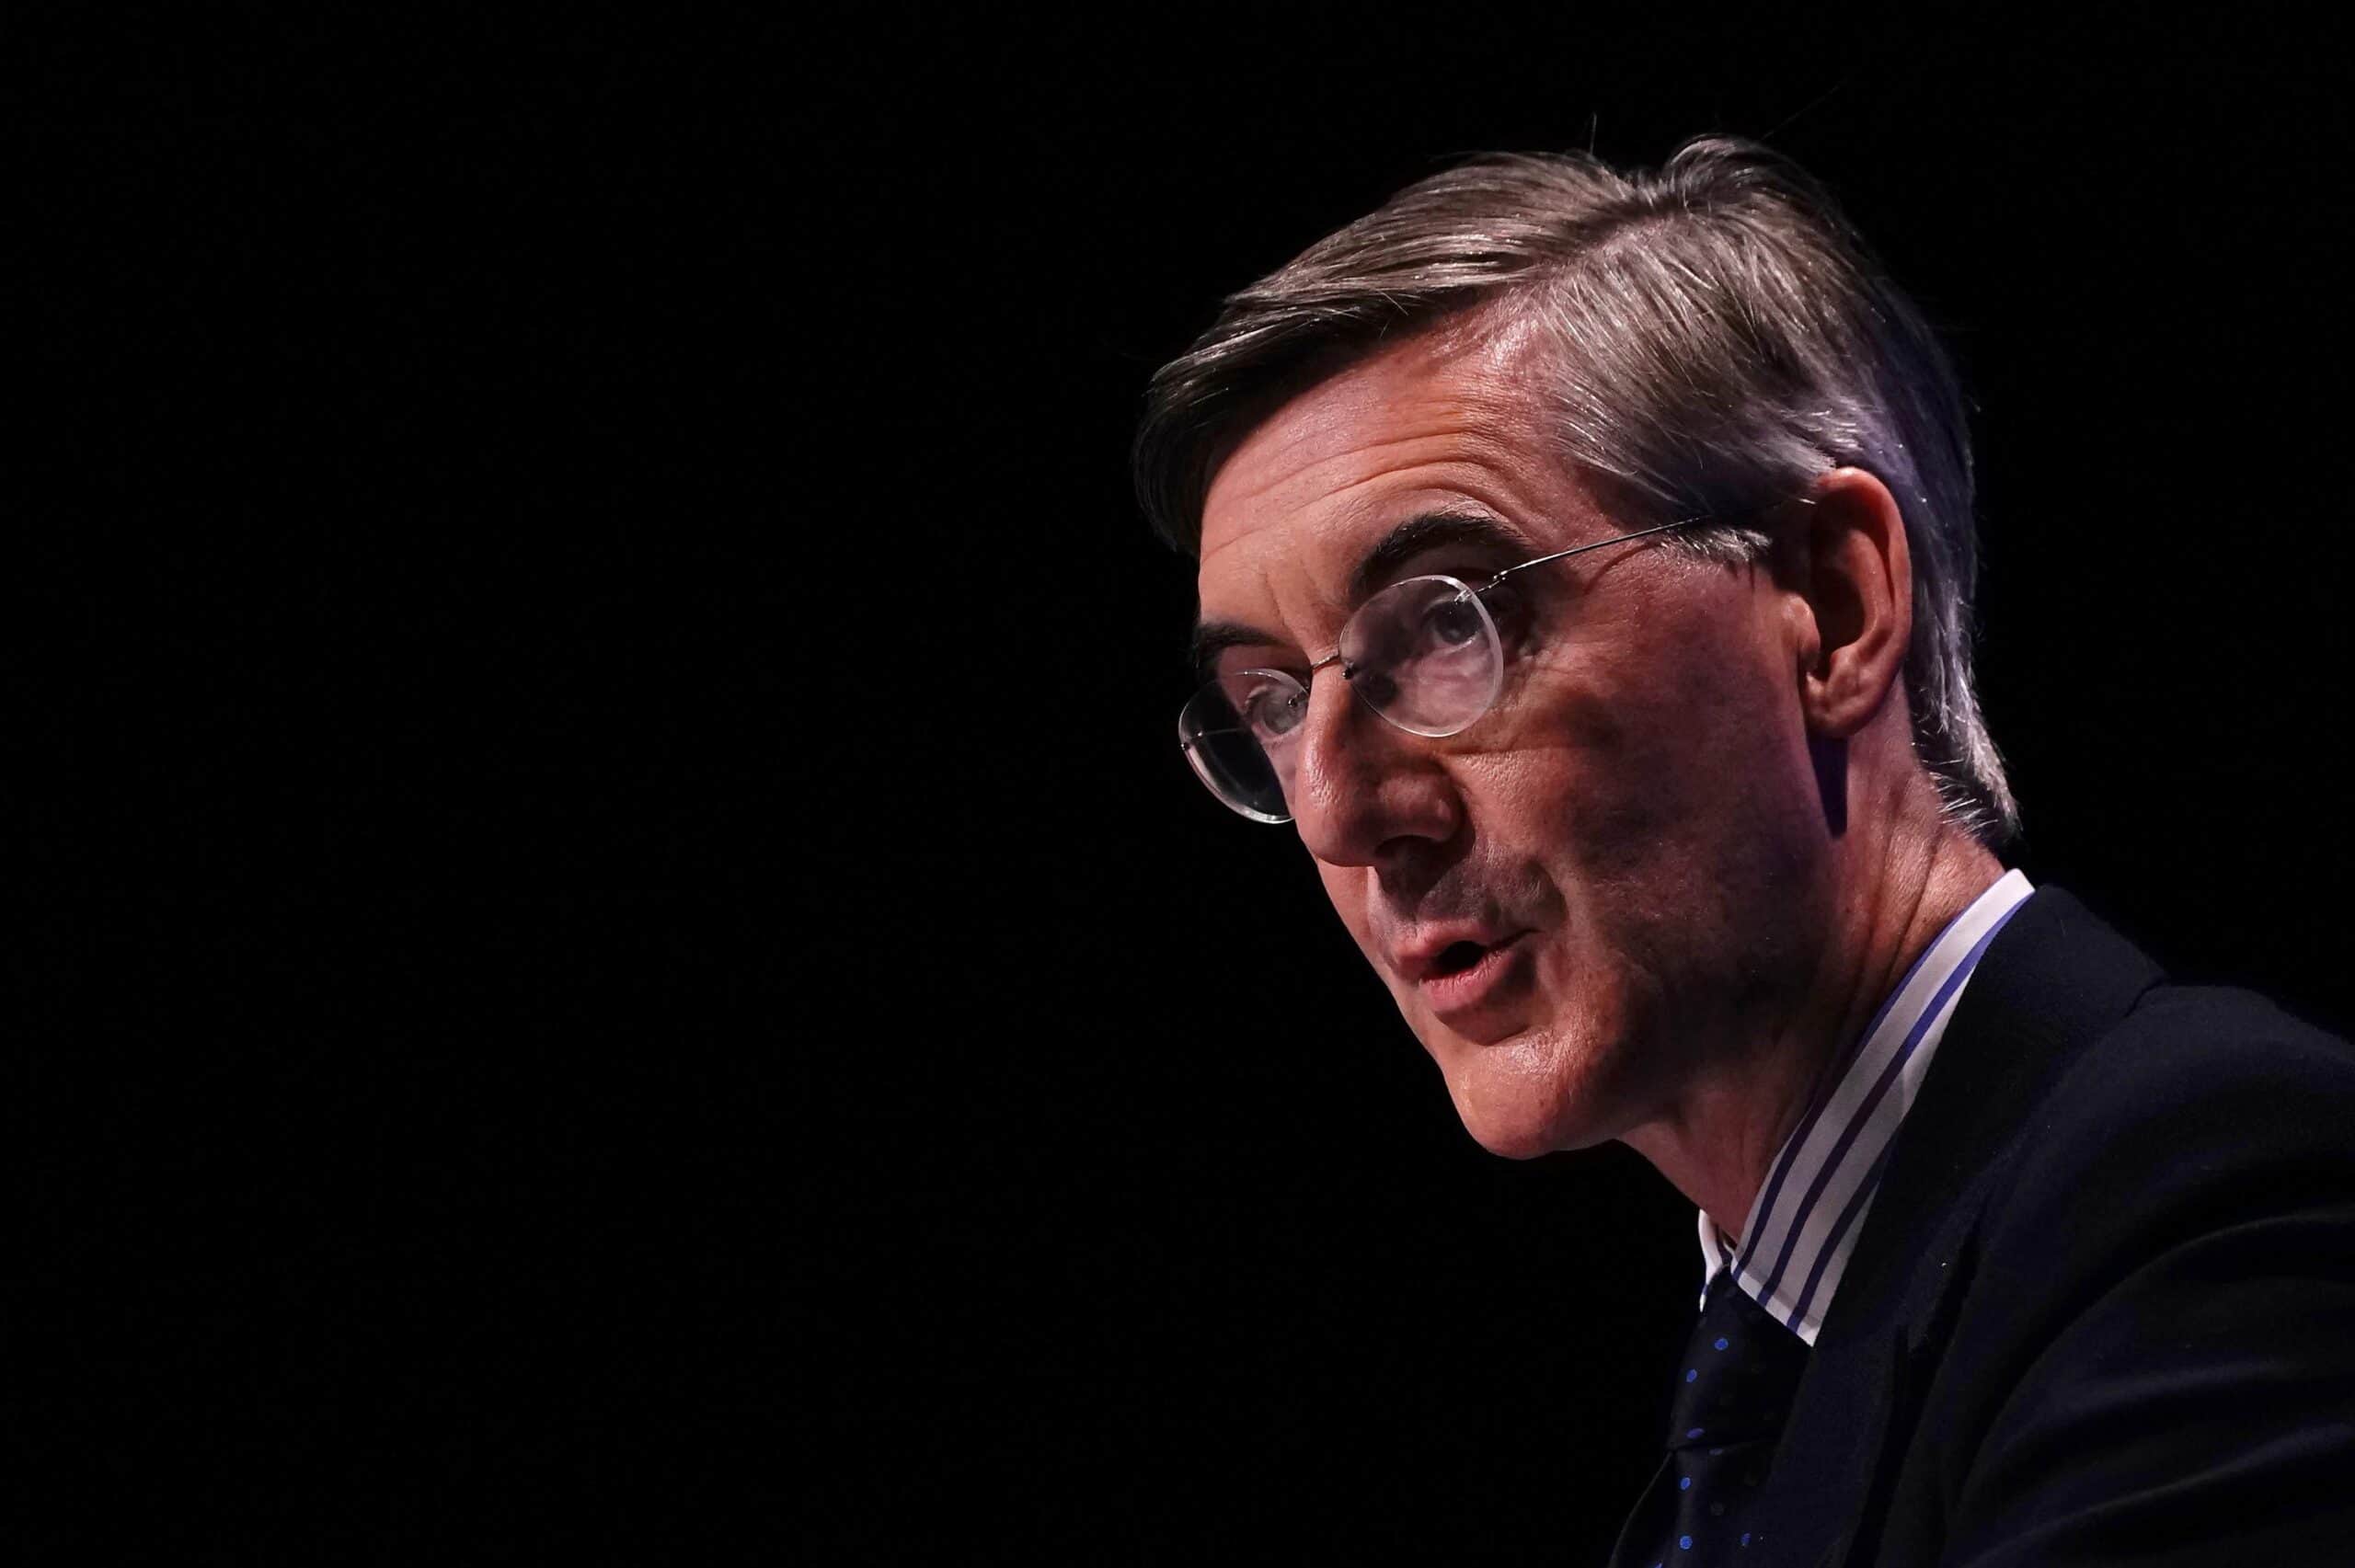 Jacob Rees-Mogg had Covid test couriered to his home during shortage